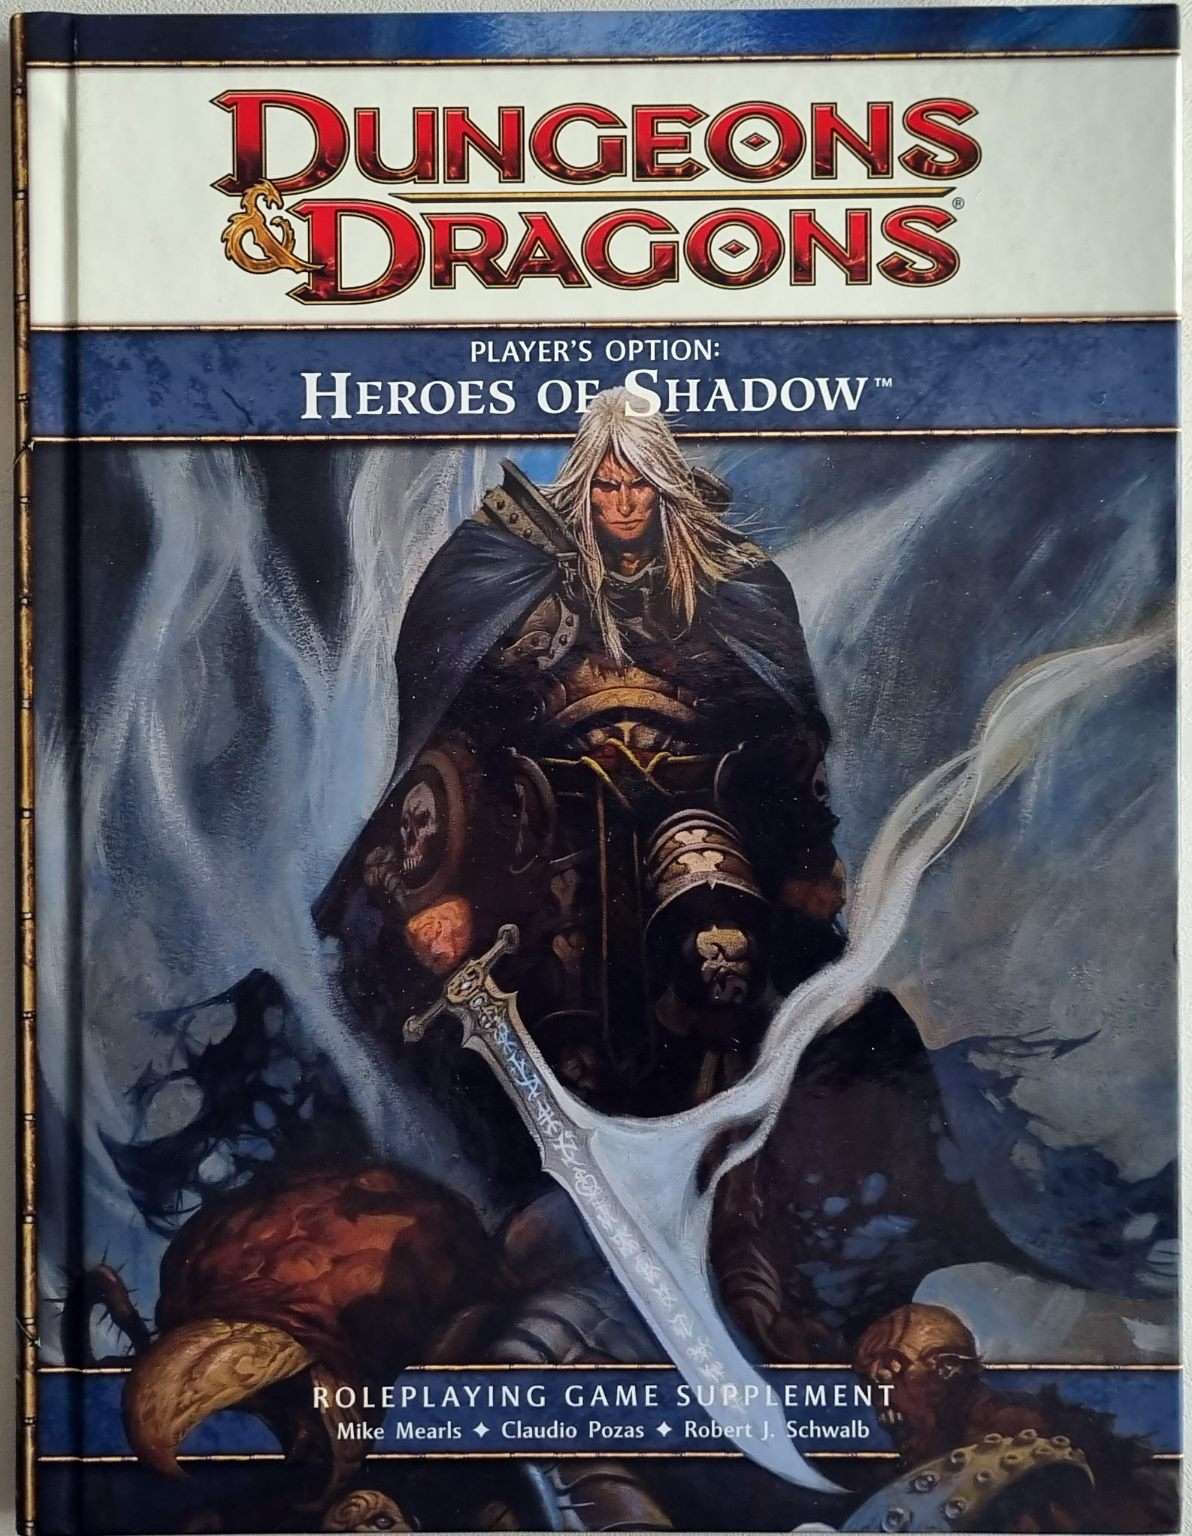 Dungeons and Dragons: Player's Options: Heroes of Shadow 4e